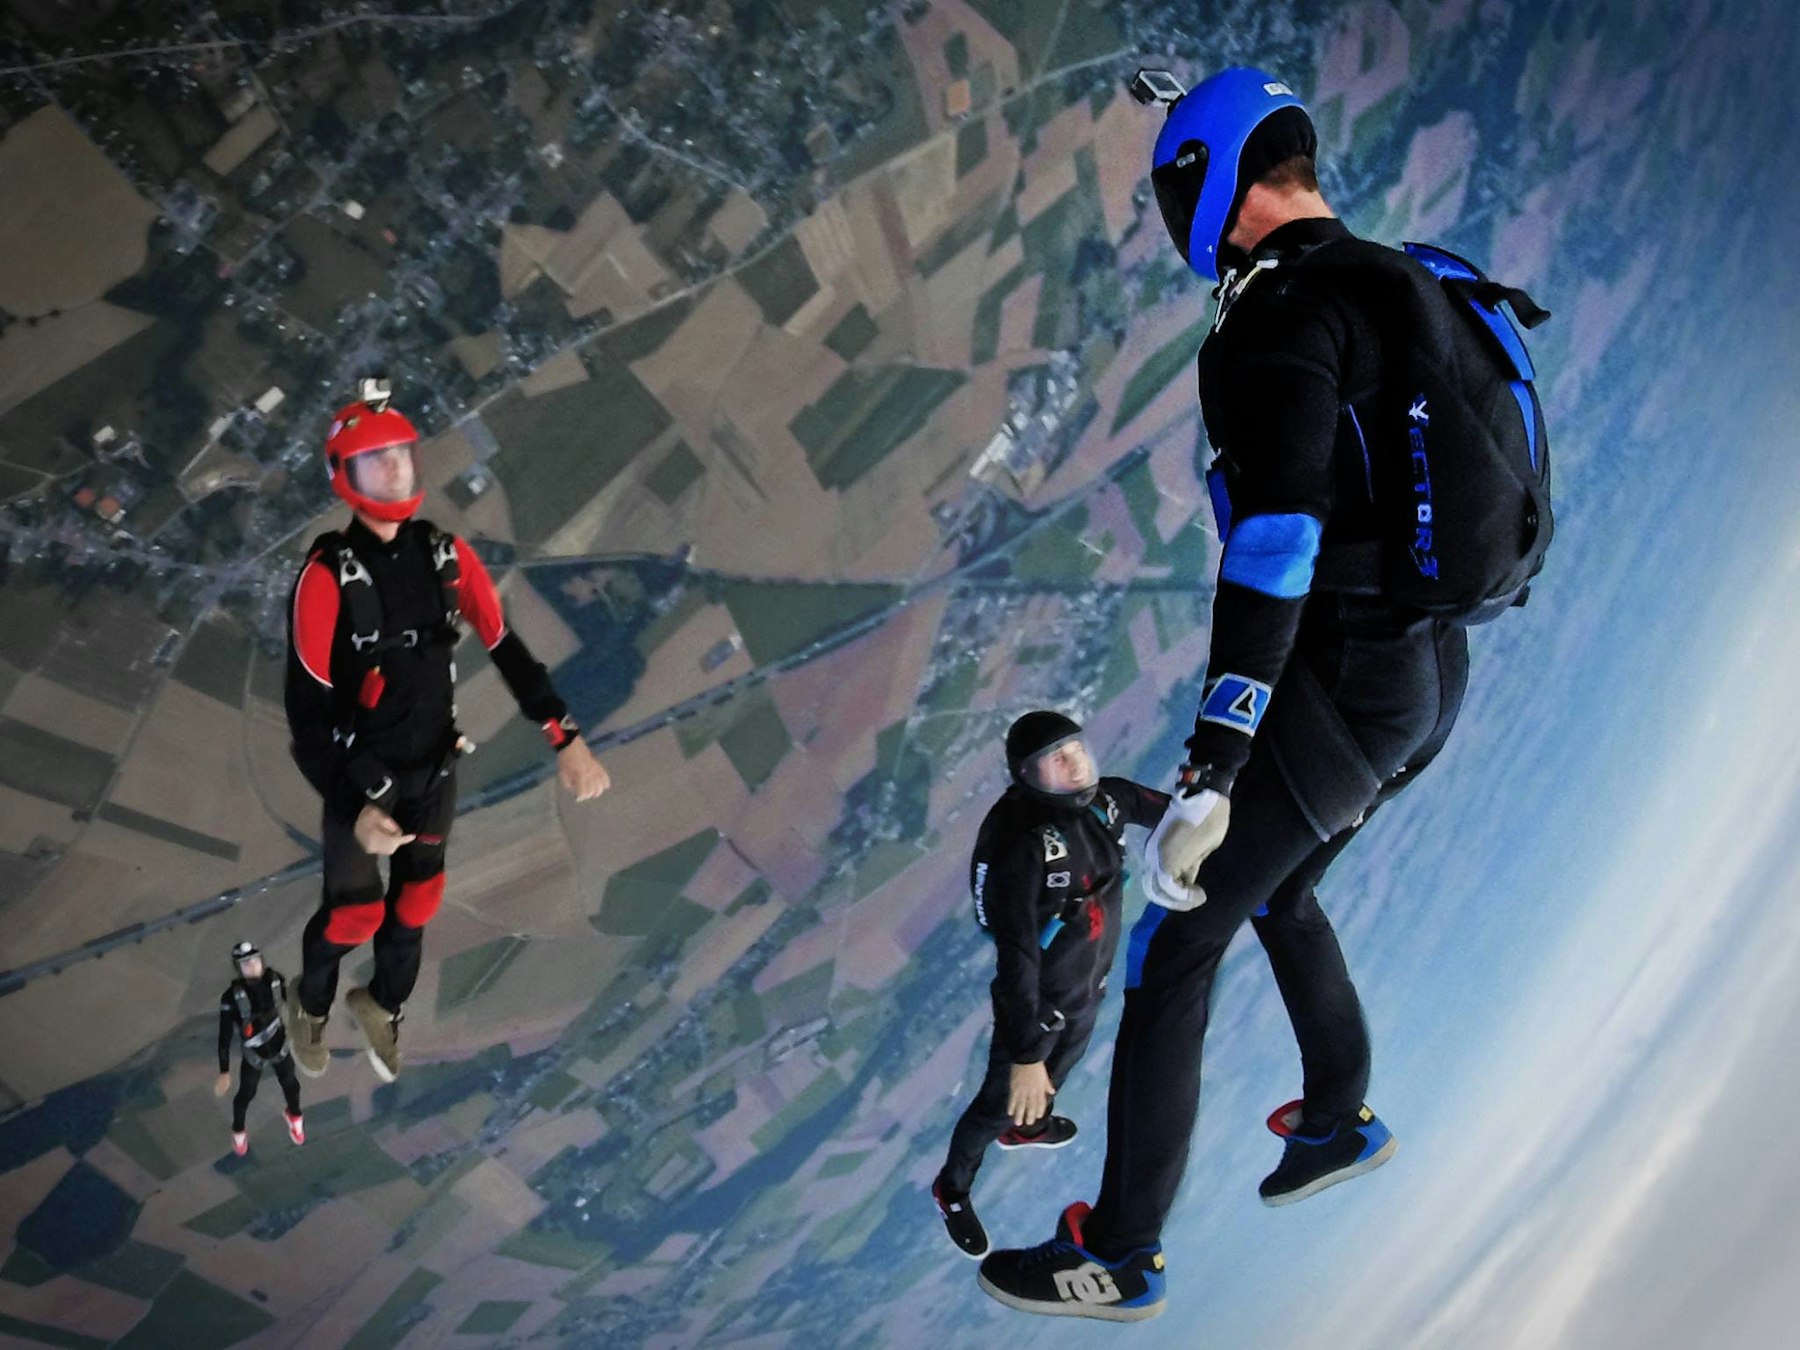 London Skydiving Expereince Tandem Skydive in London Book Tickets Now